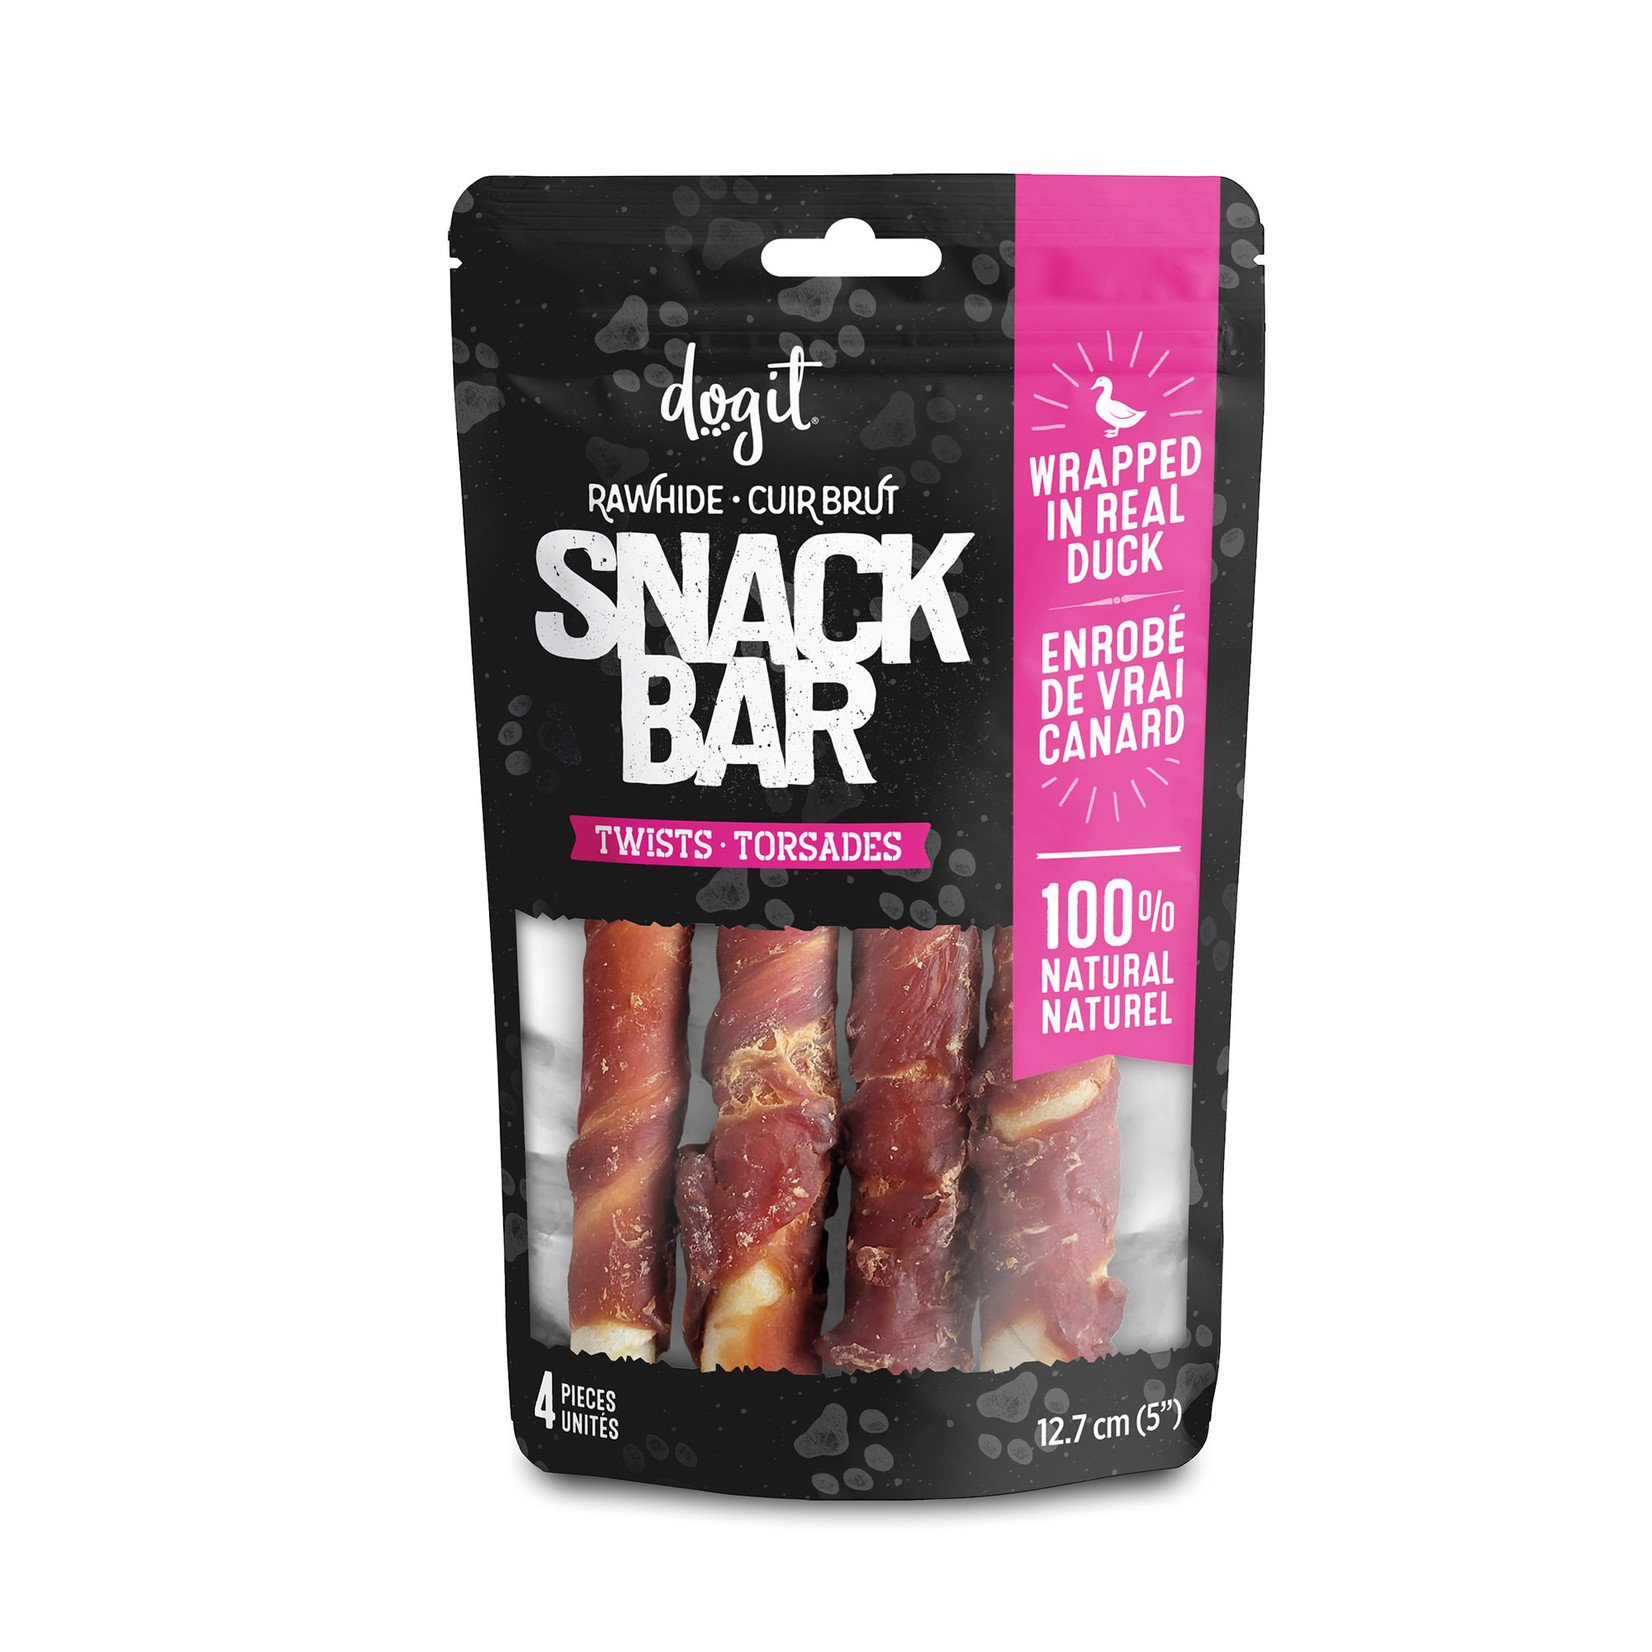 DOG IT Dogit Snack Bar Rawhide - Duck-Wrapped Twists - 4 pcs (12.7 cm/5 in)